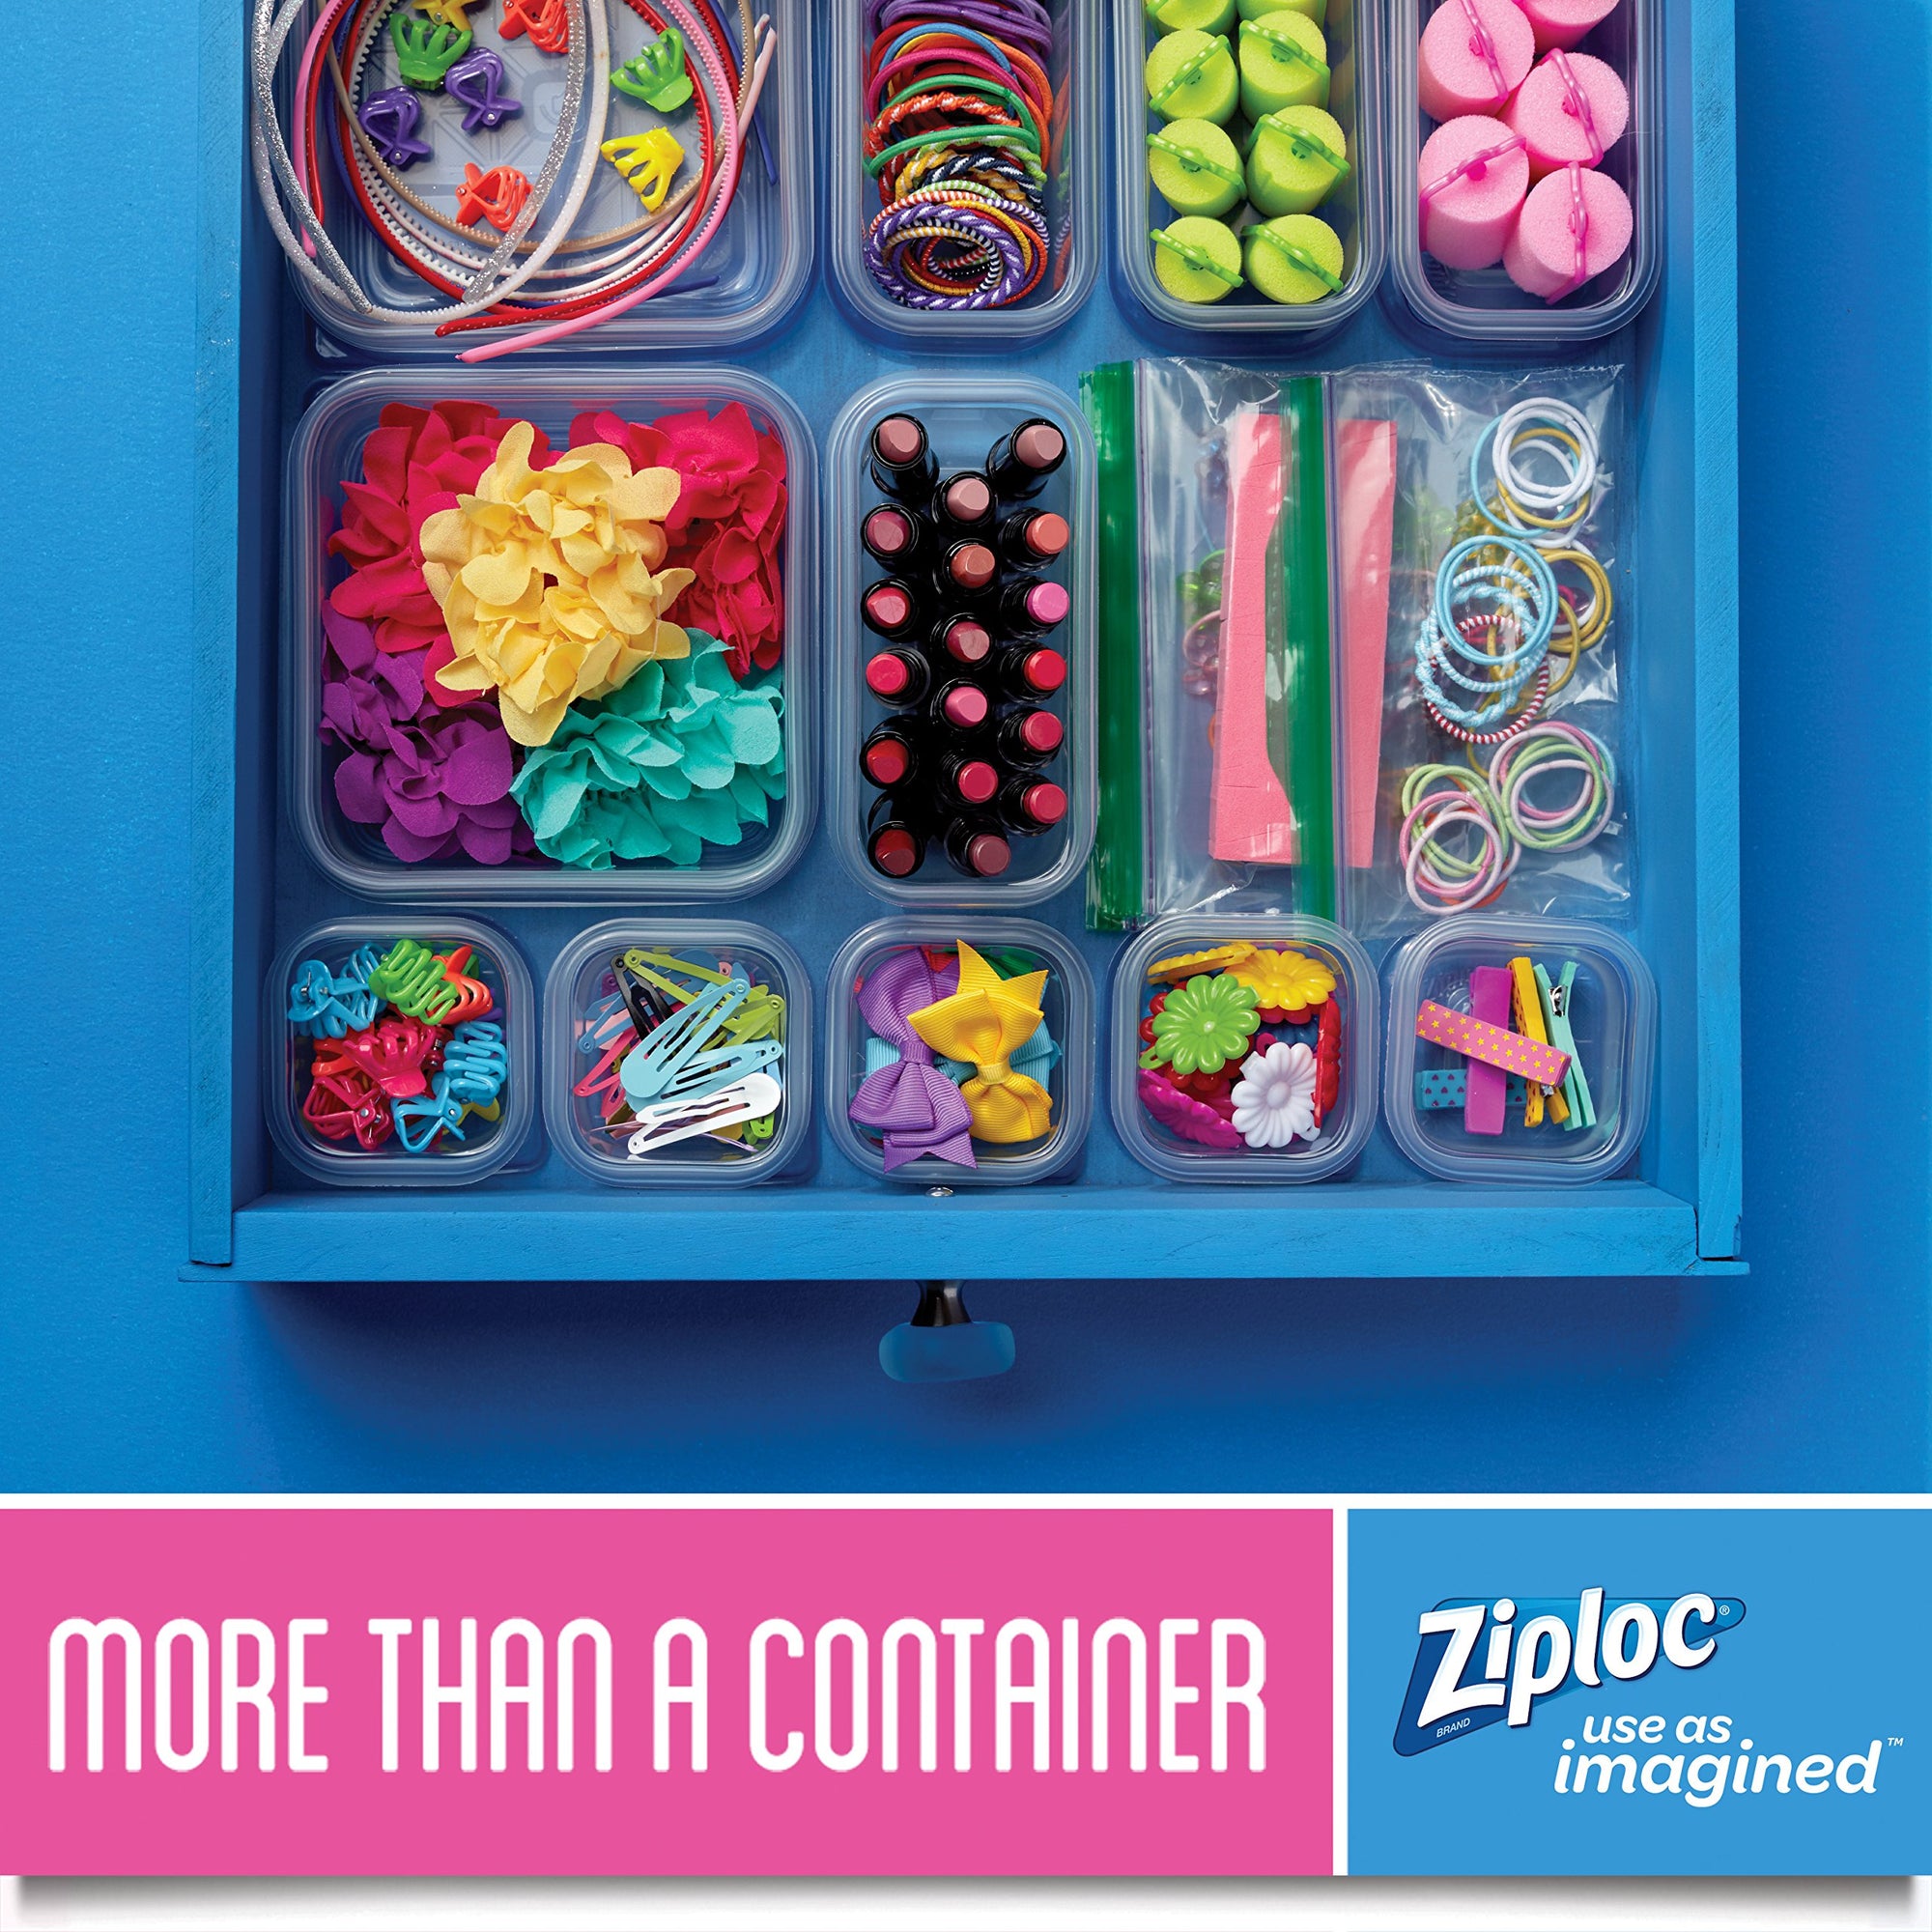 Ziploc Variety Pack New Containers 24 piece set